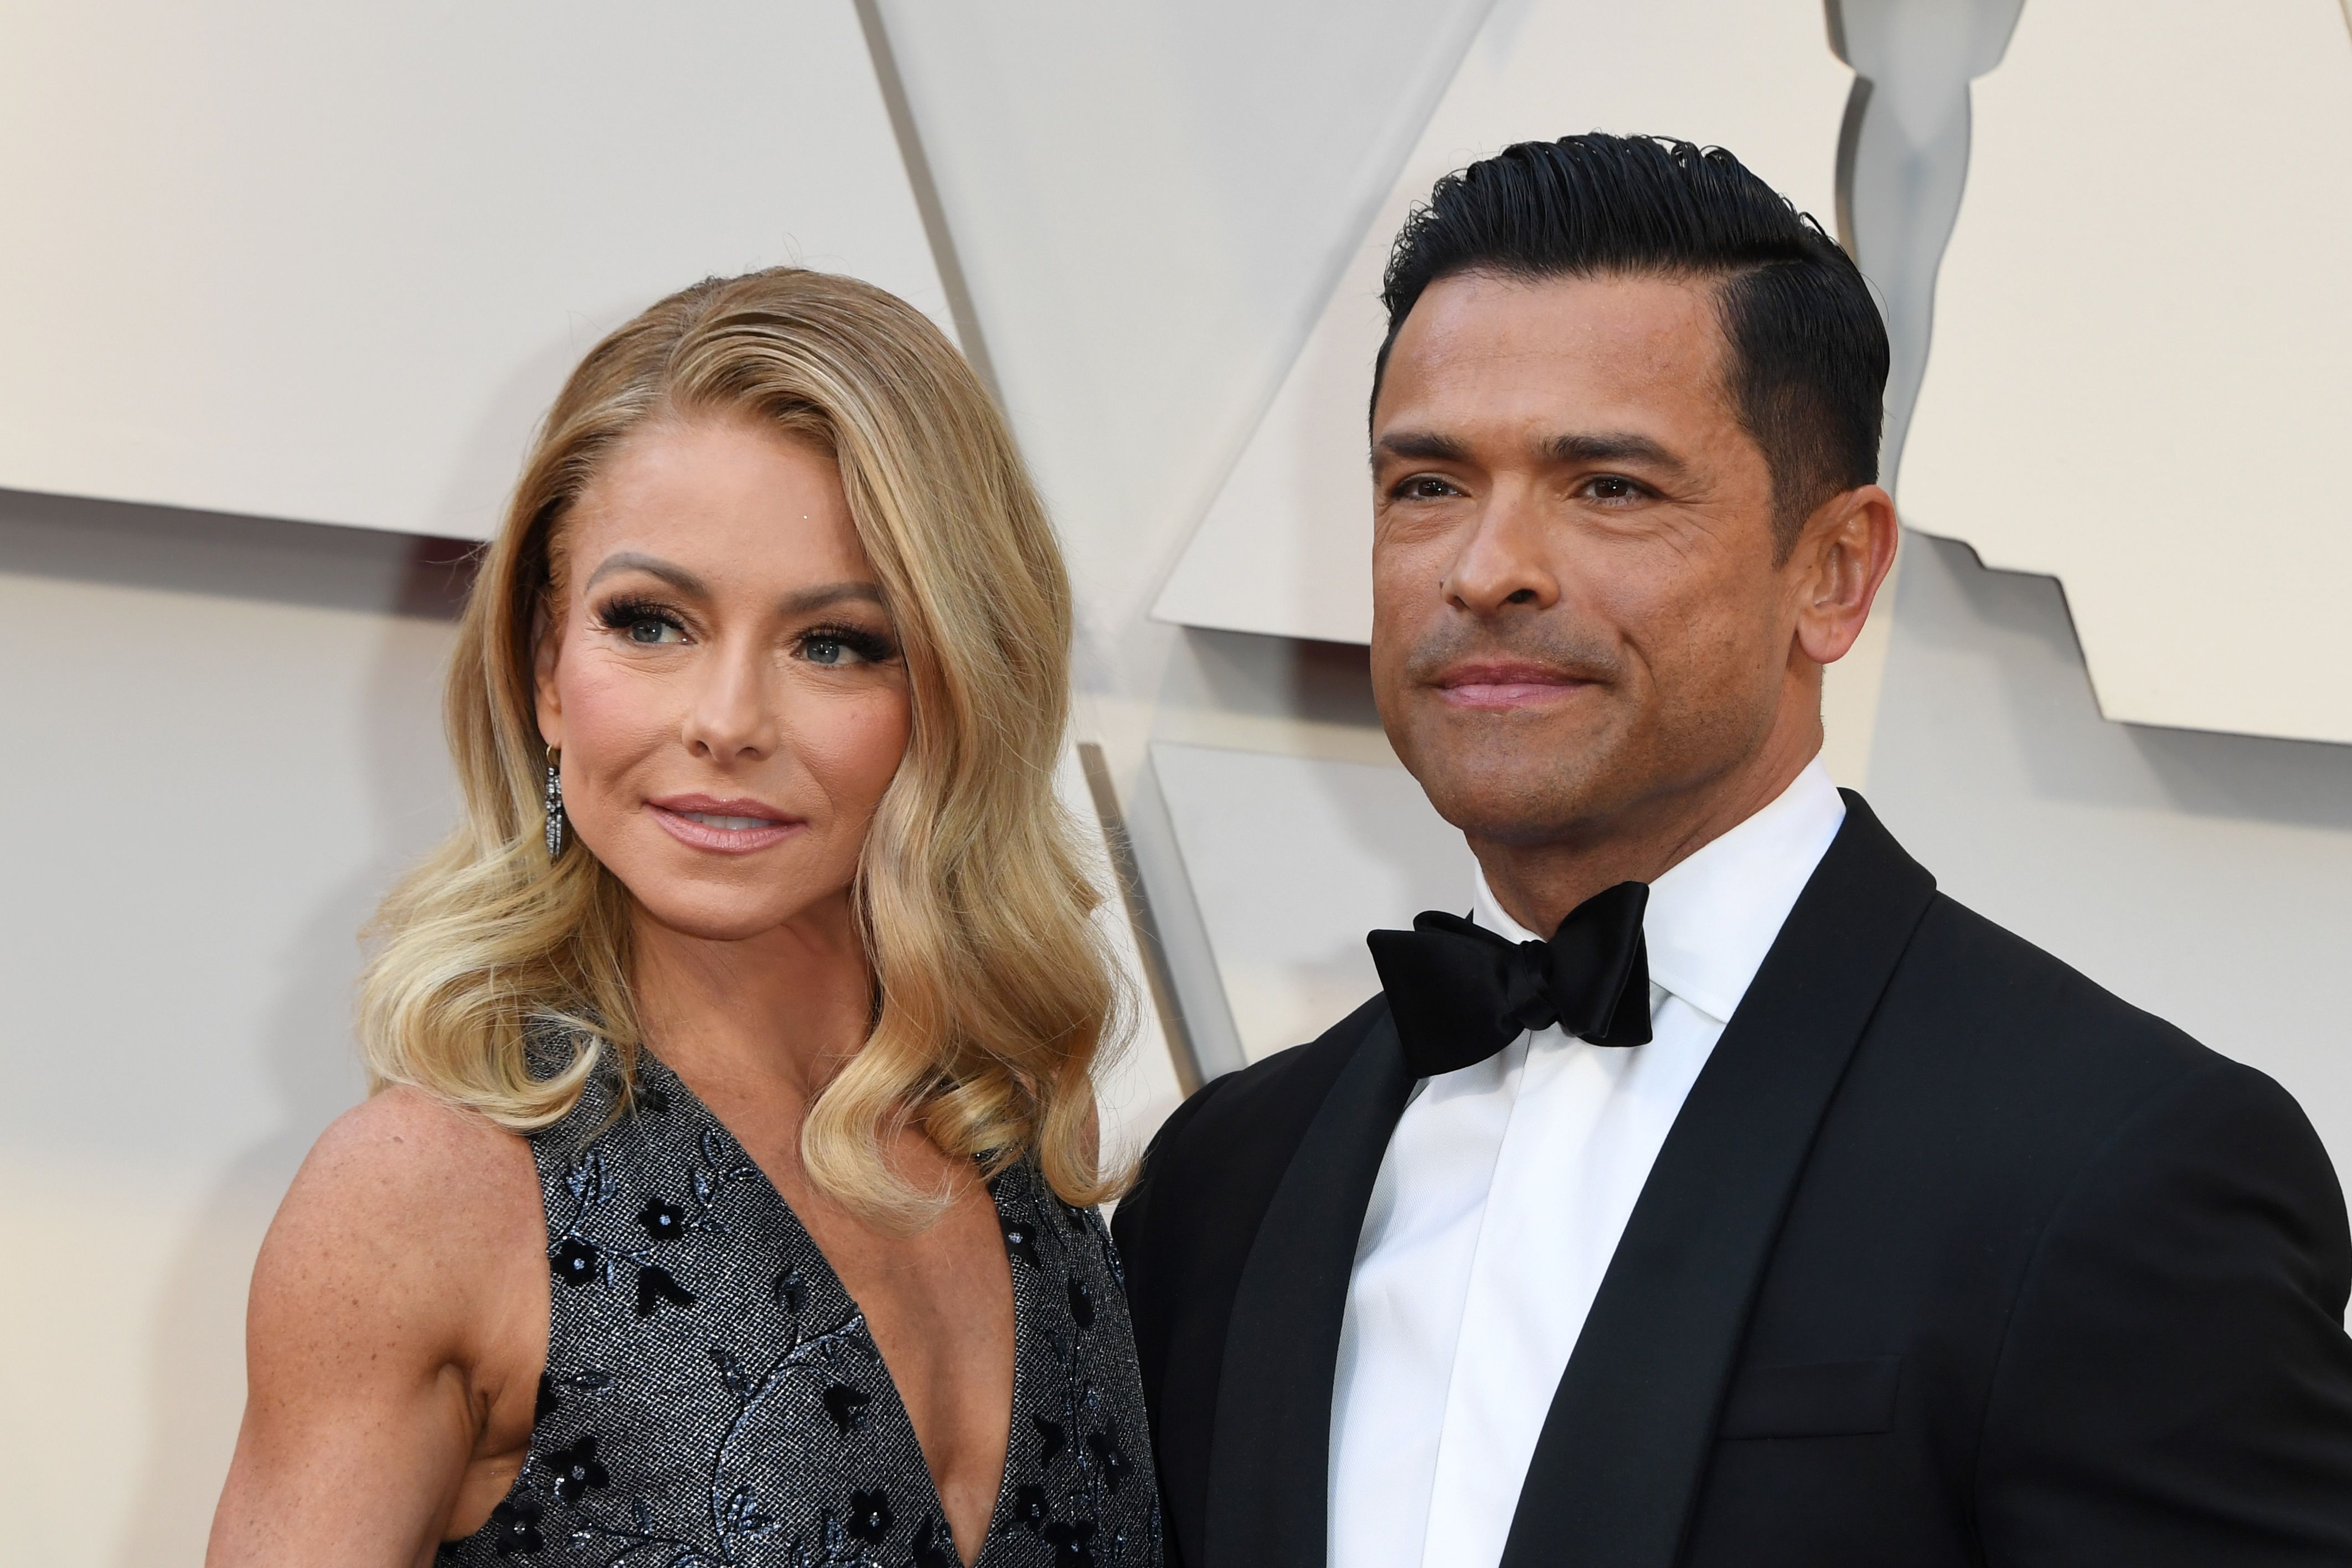 Kelly Ripa and Her Husband Mark Consuelos Get Backlash image picture